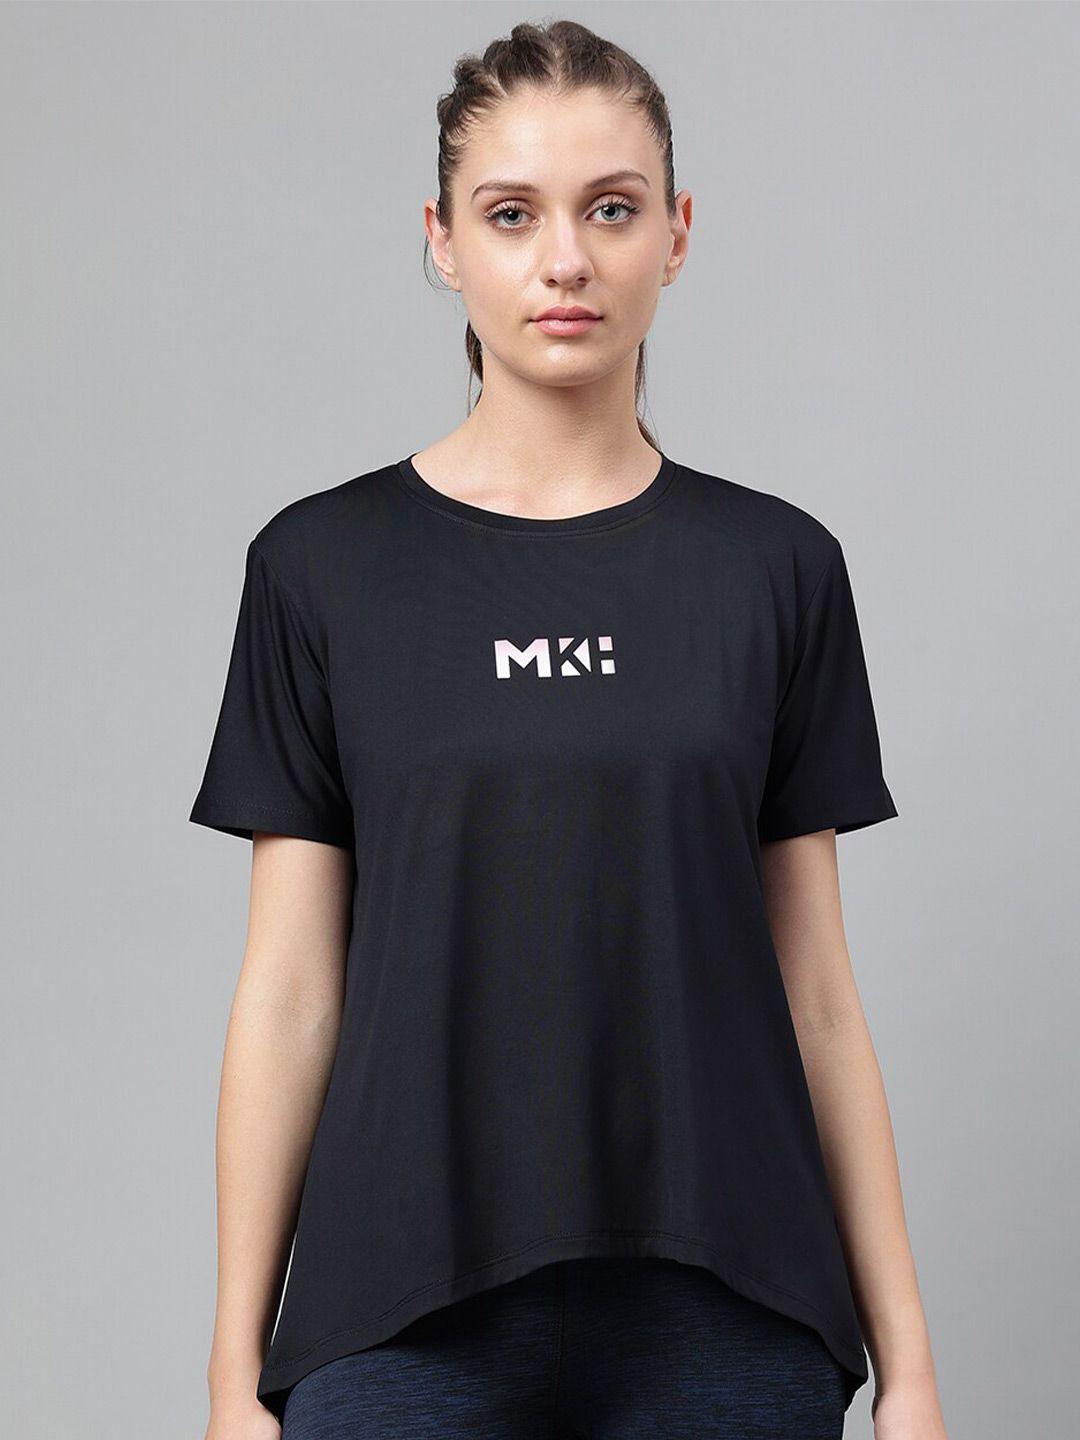 mkh typography printed dri-fit relaxed fit t-shirt